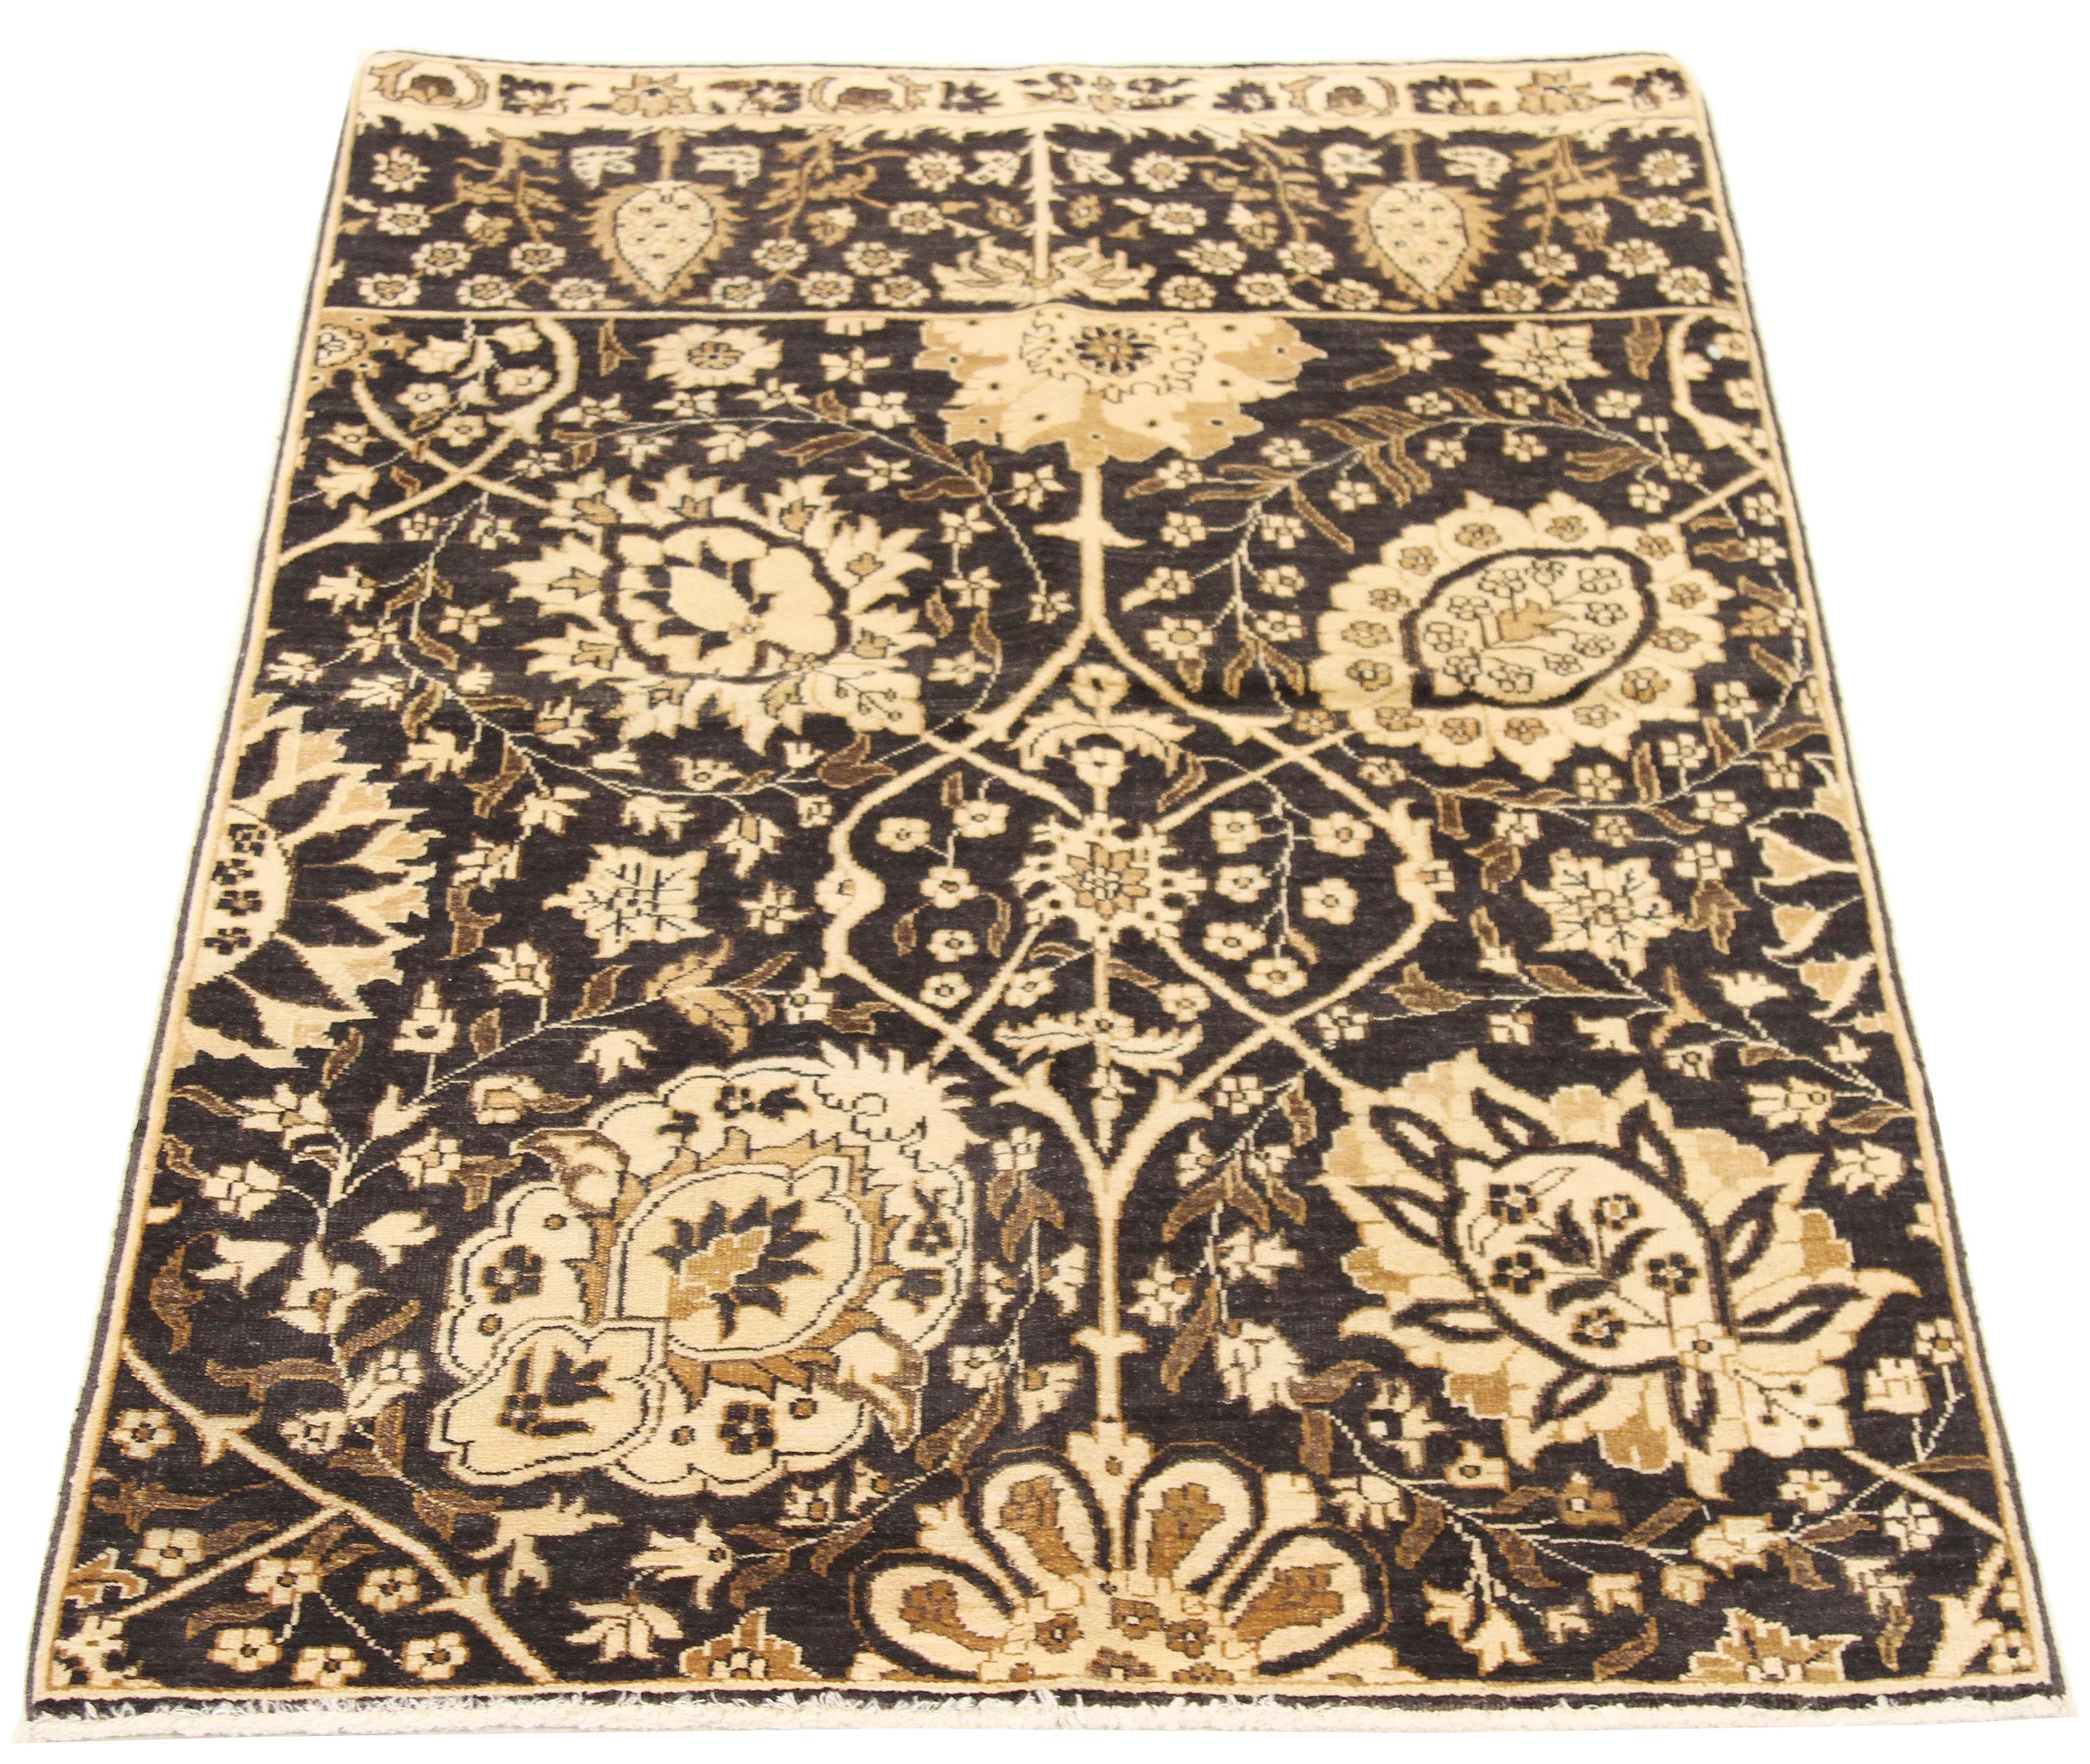 Contemporary Persian rug handwoven from the finest sheep’s wool and colored with all-natural vegetable dyes that are safe for humans and pets. It’s a traditional Tabriz weaving featuring a lovely ensemble of floral designs in black and brown over an